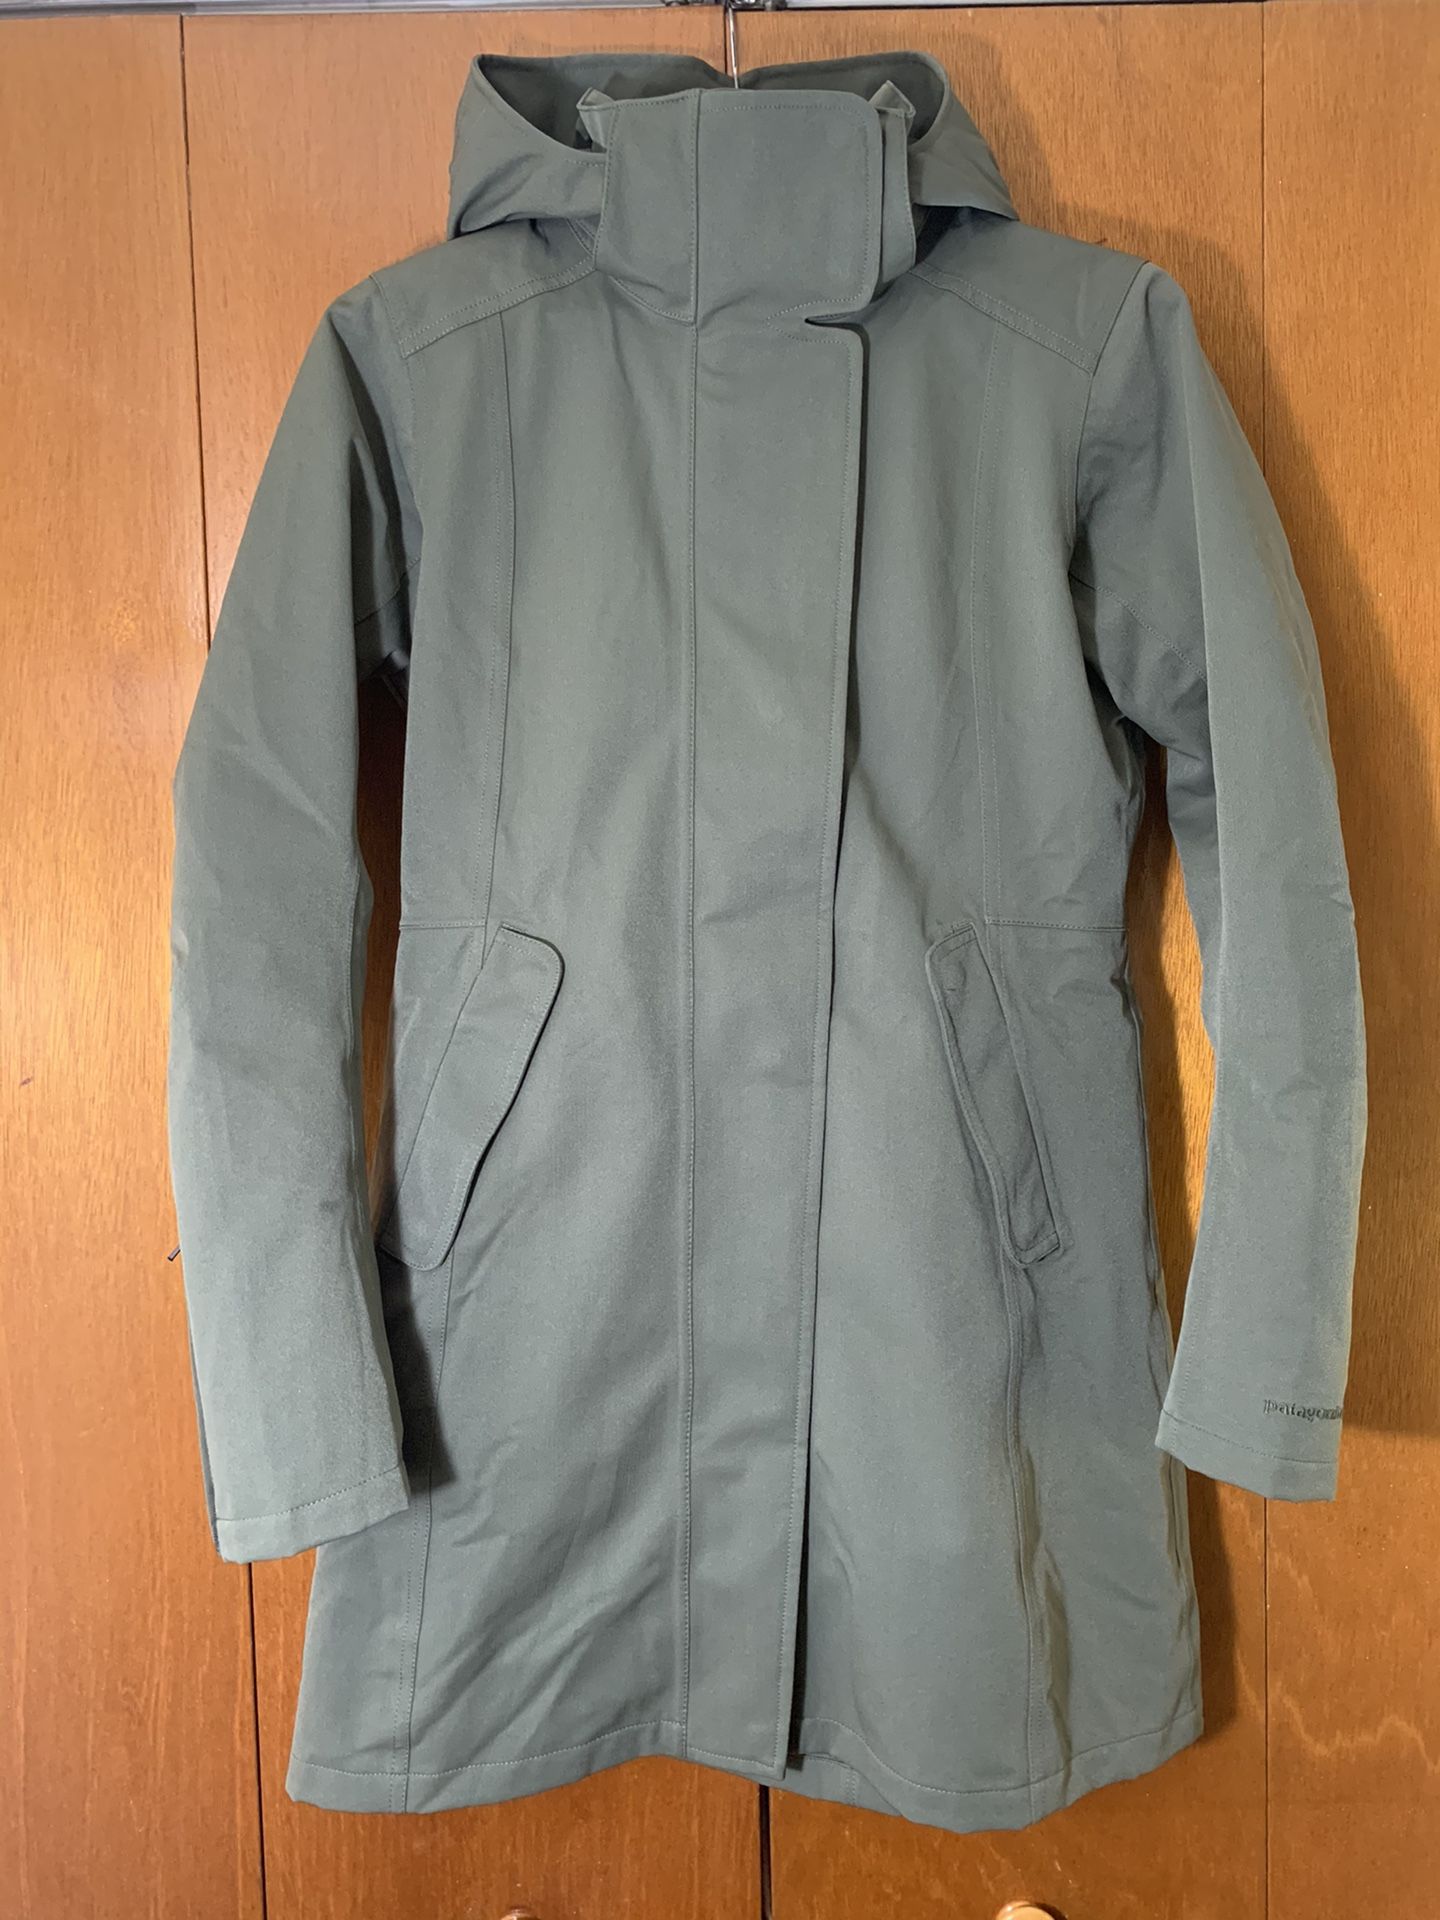 Patagonia Women’s Tres 3-in-1 Parka. Like NEW! Size S